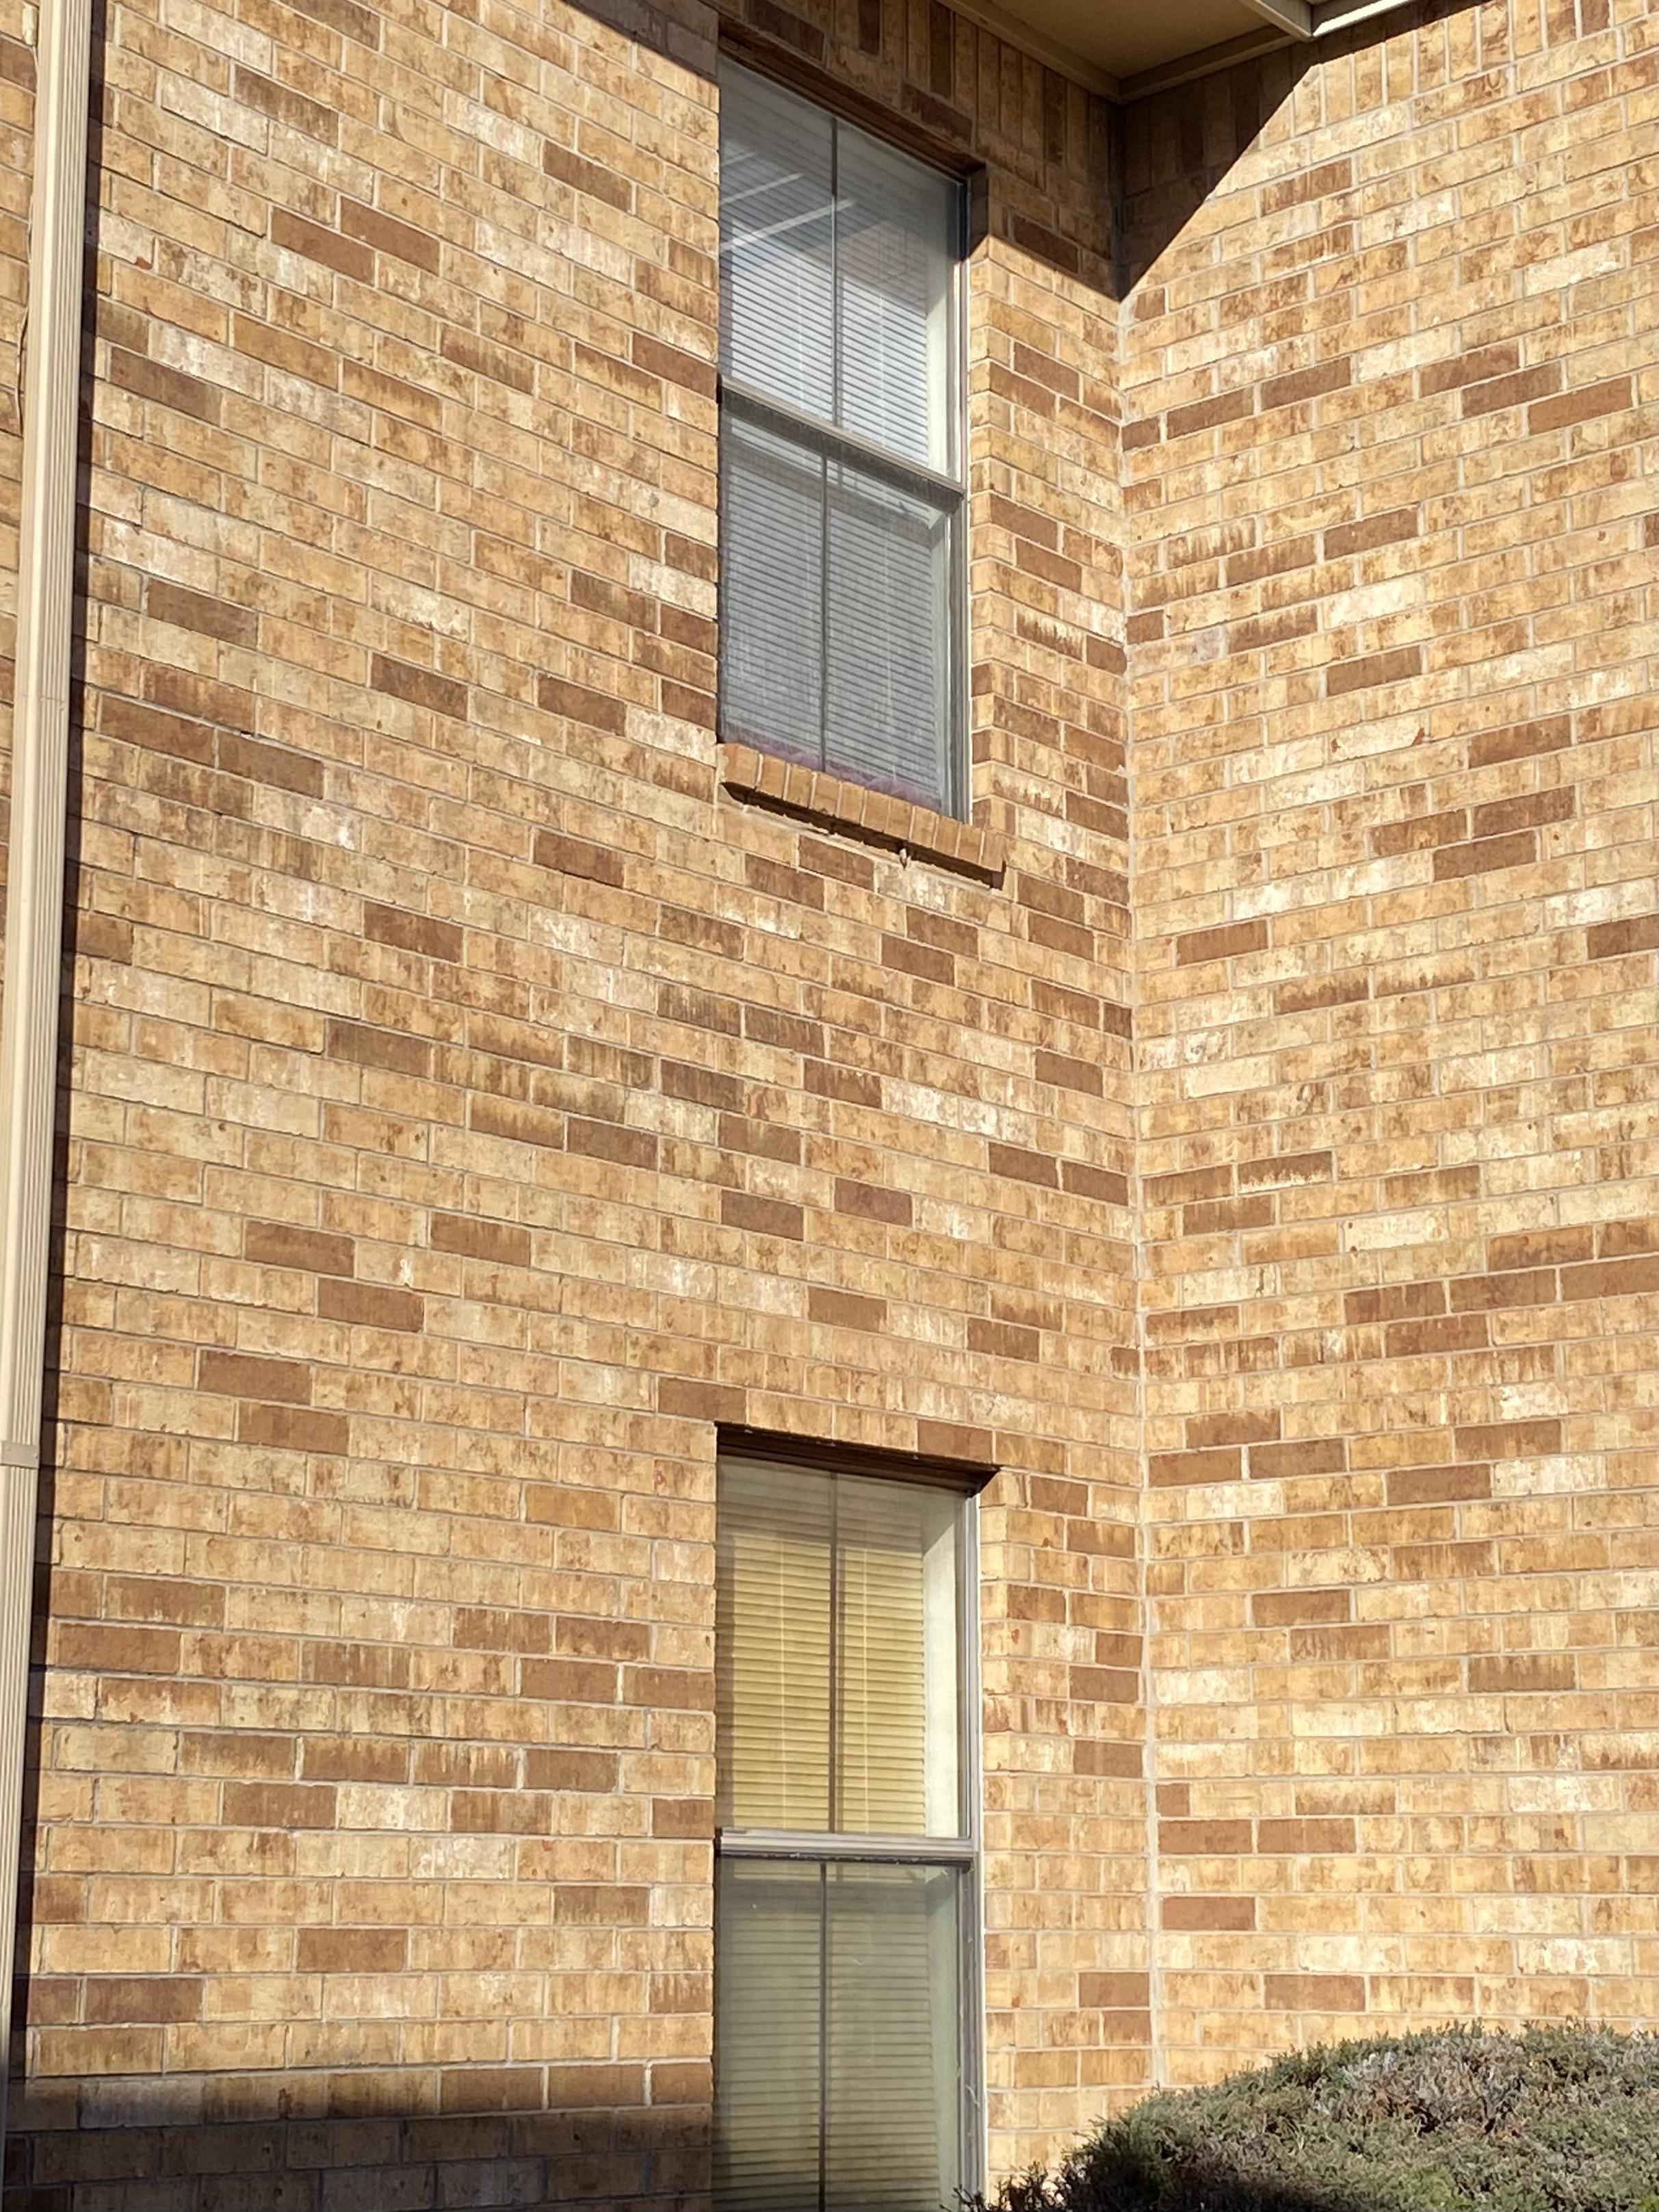 Two stacked windows with blinds on a brick wall, with the blinds of one window light brown and other white